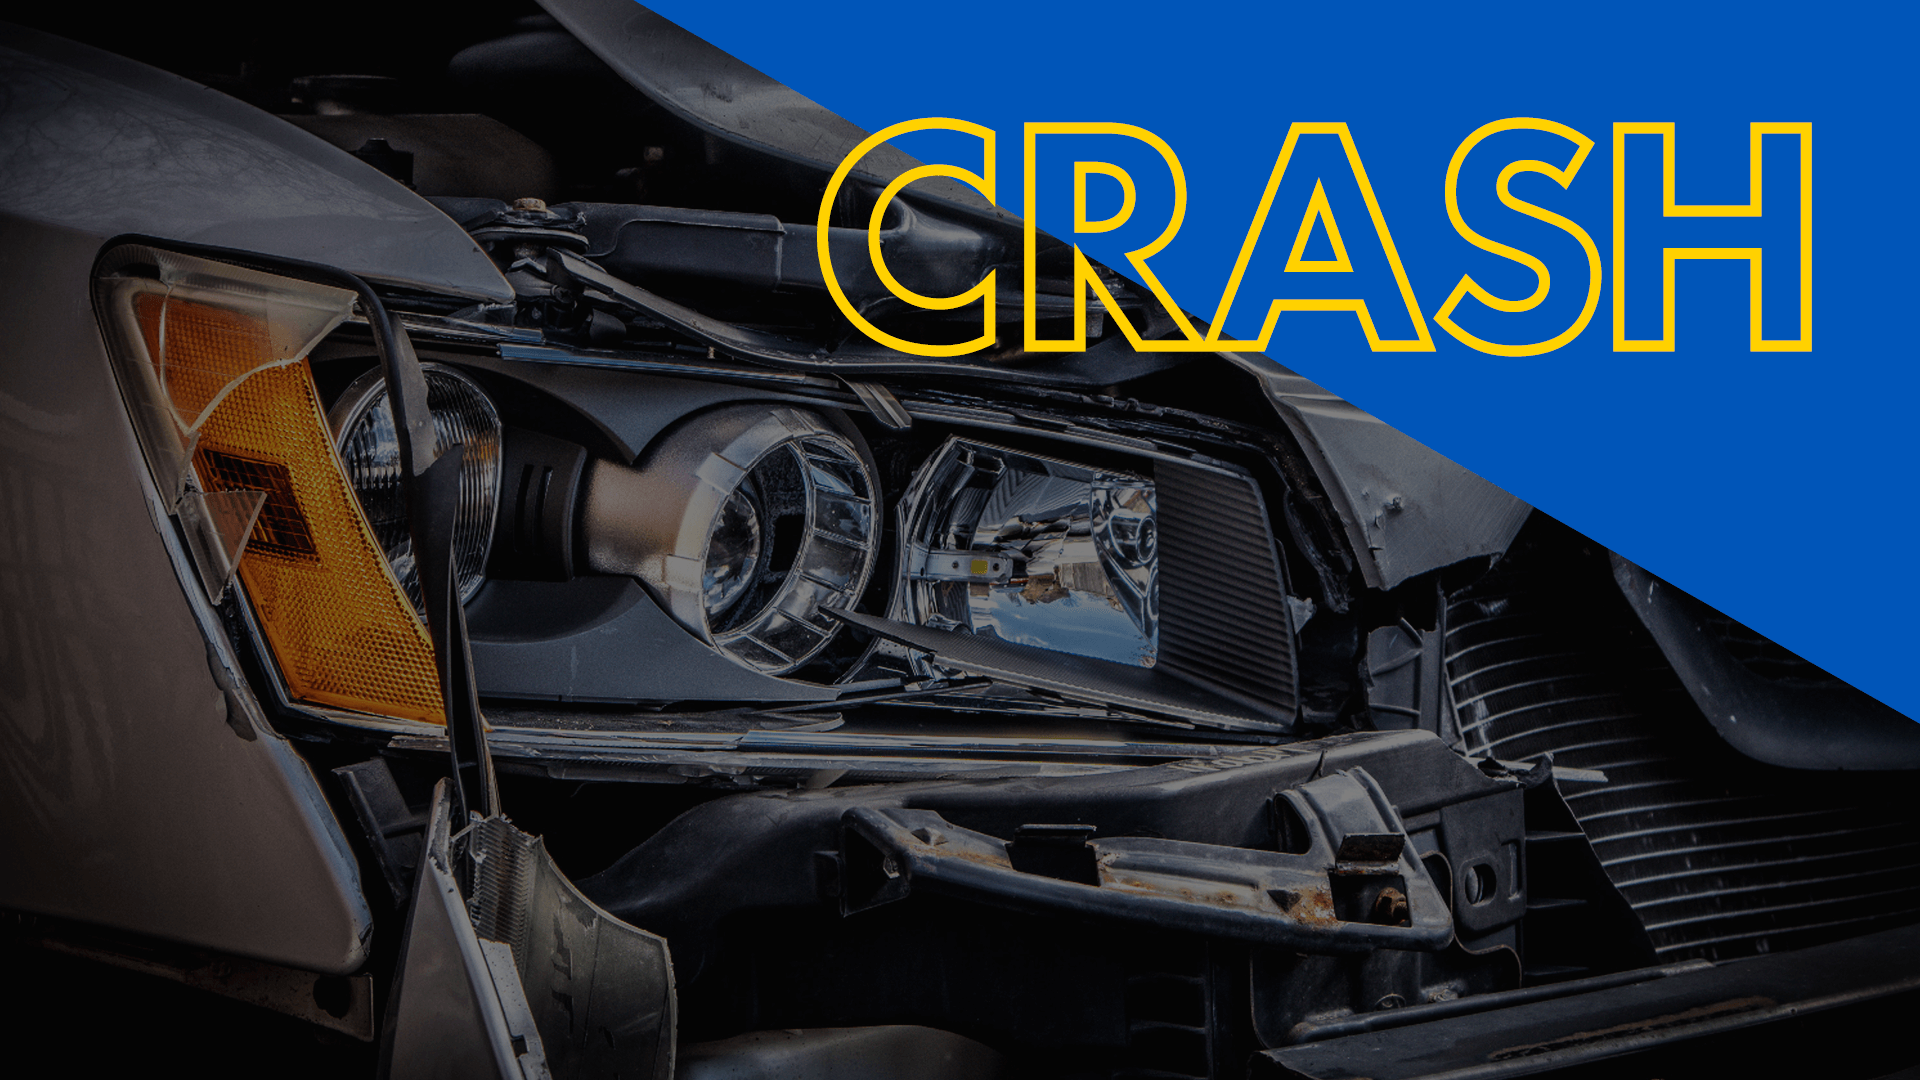 Woman ejected from vehicle in rollover crash in Grand Traverse Co.